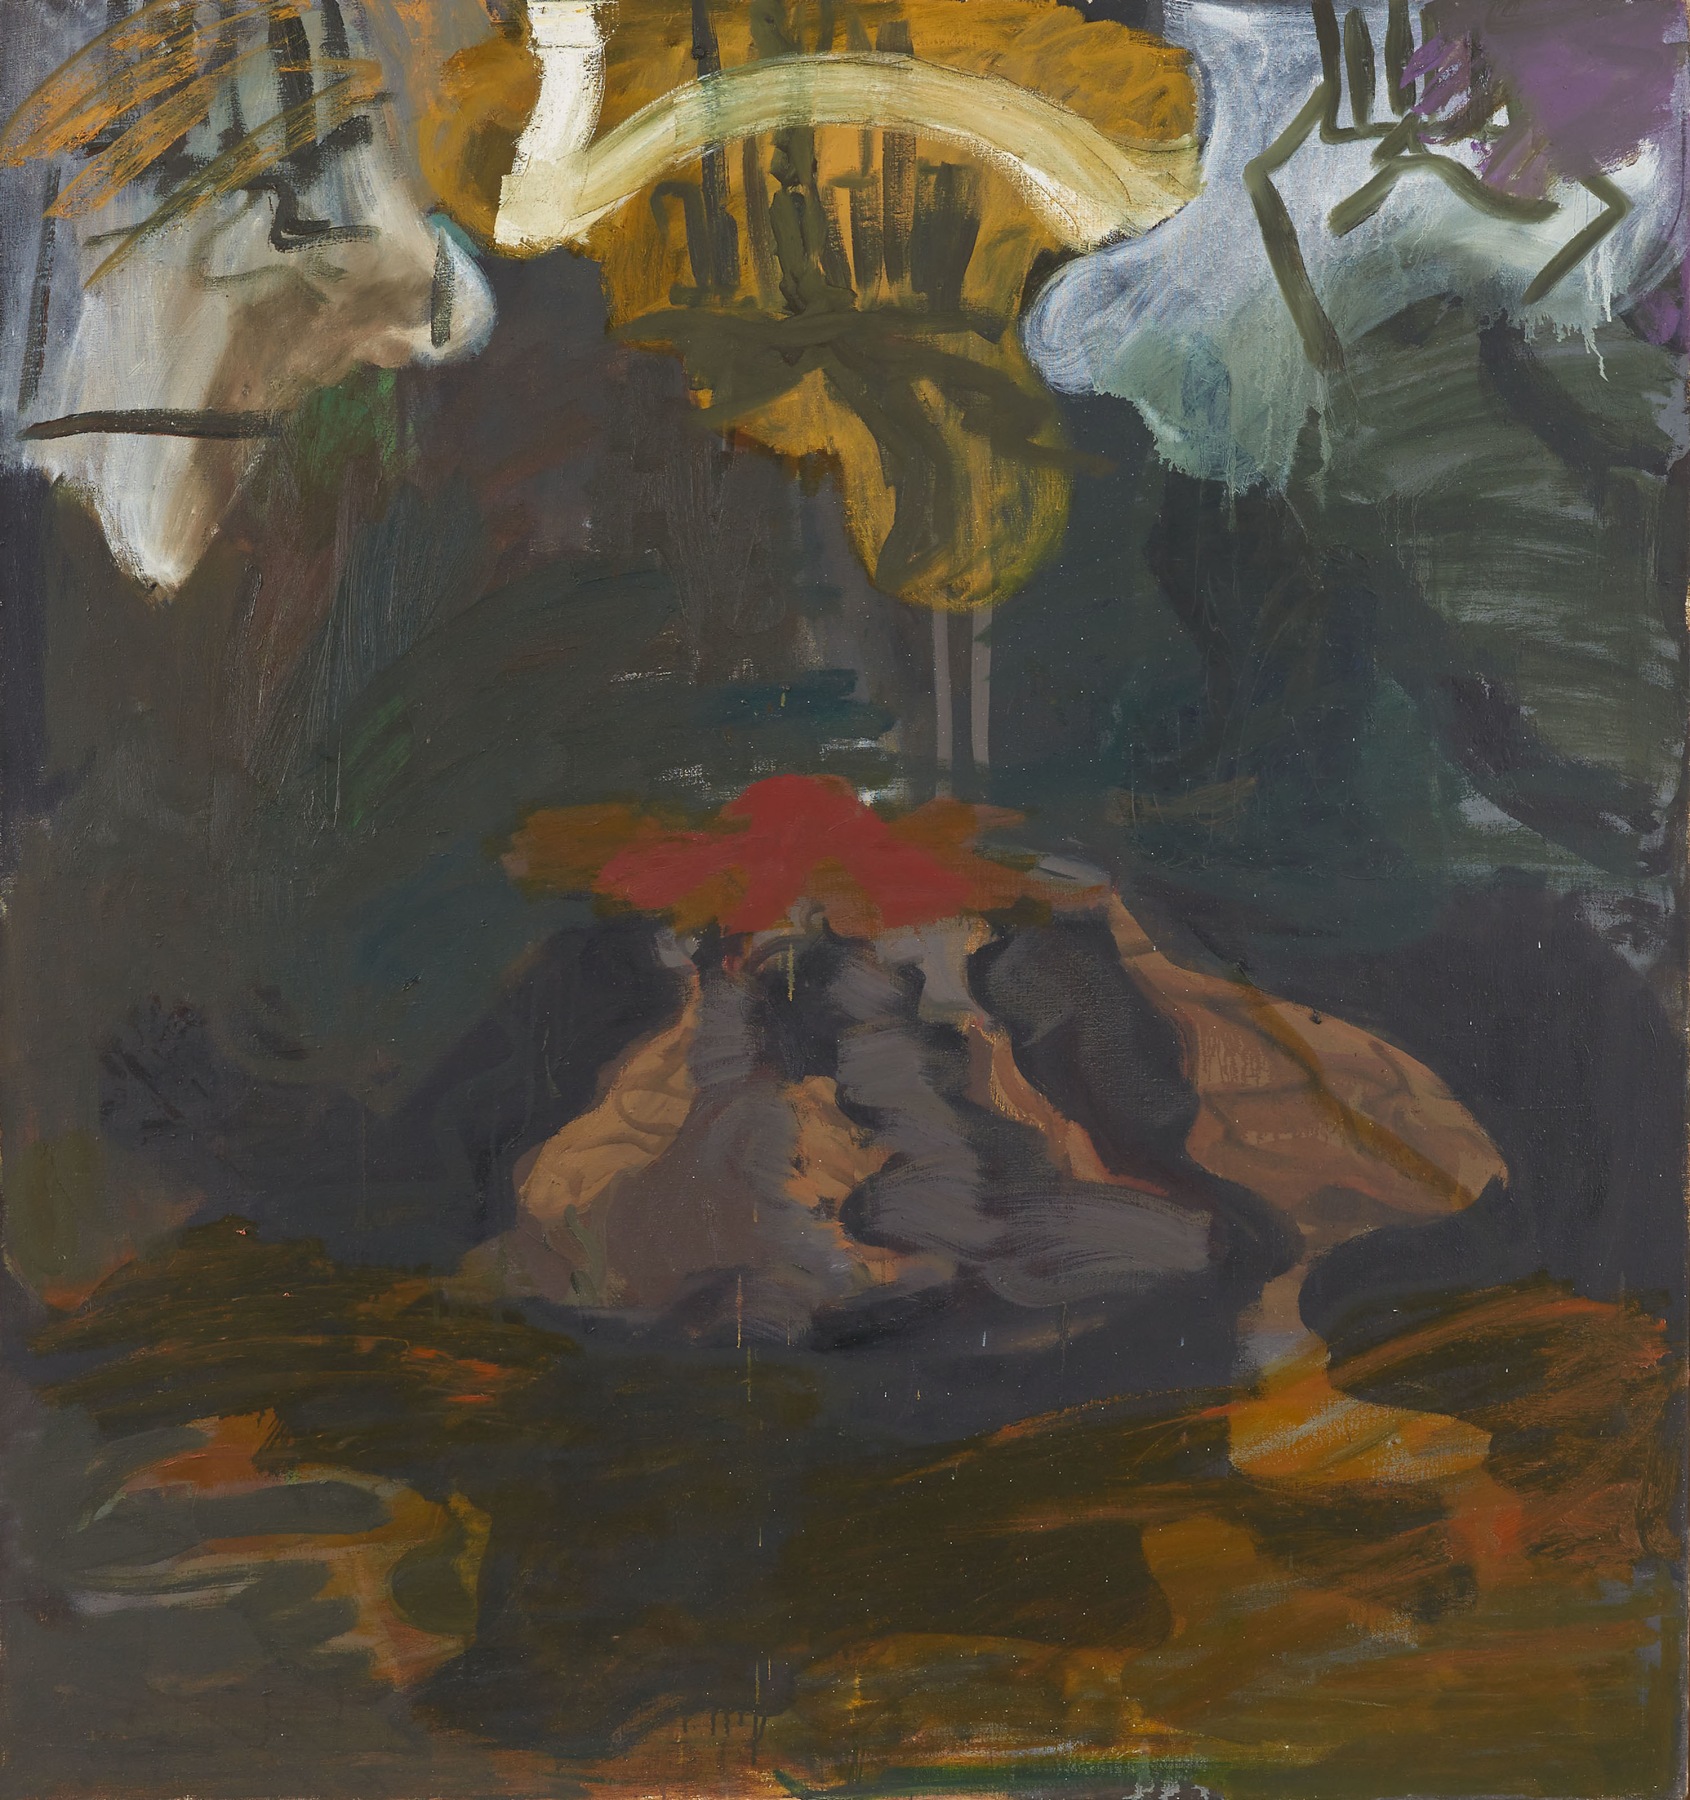 &quot;Untitled&quot;, 1989 Oil on canvas